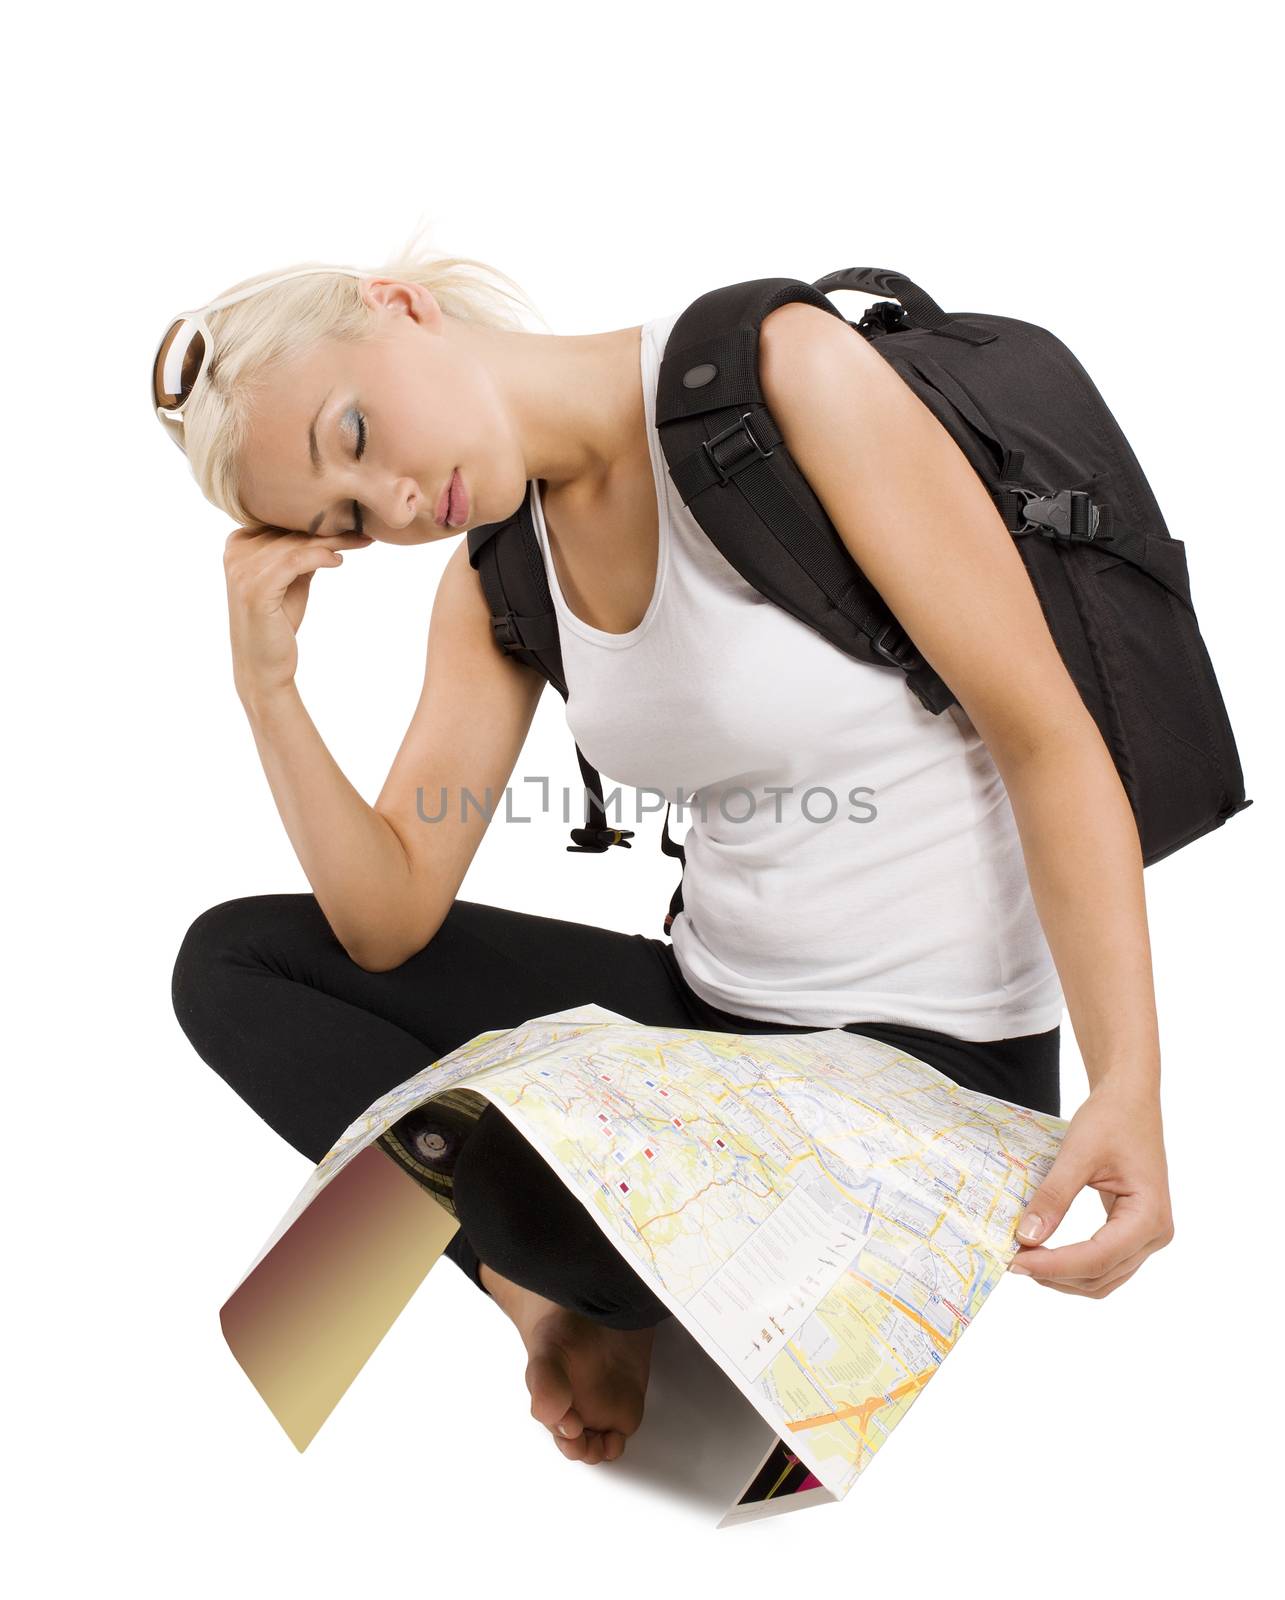 blond young tourist with map sitting down and sleeping